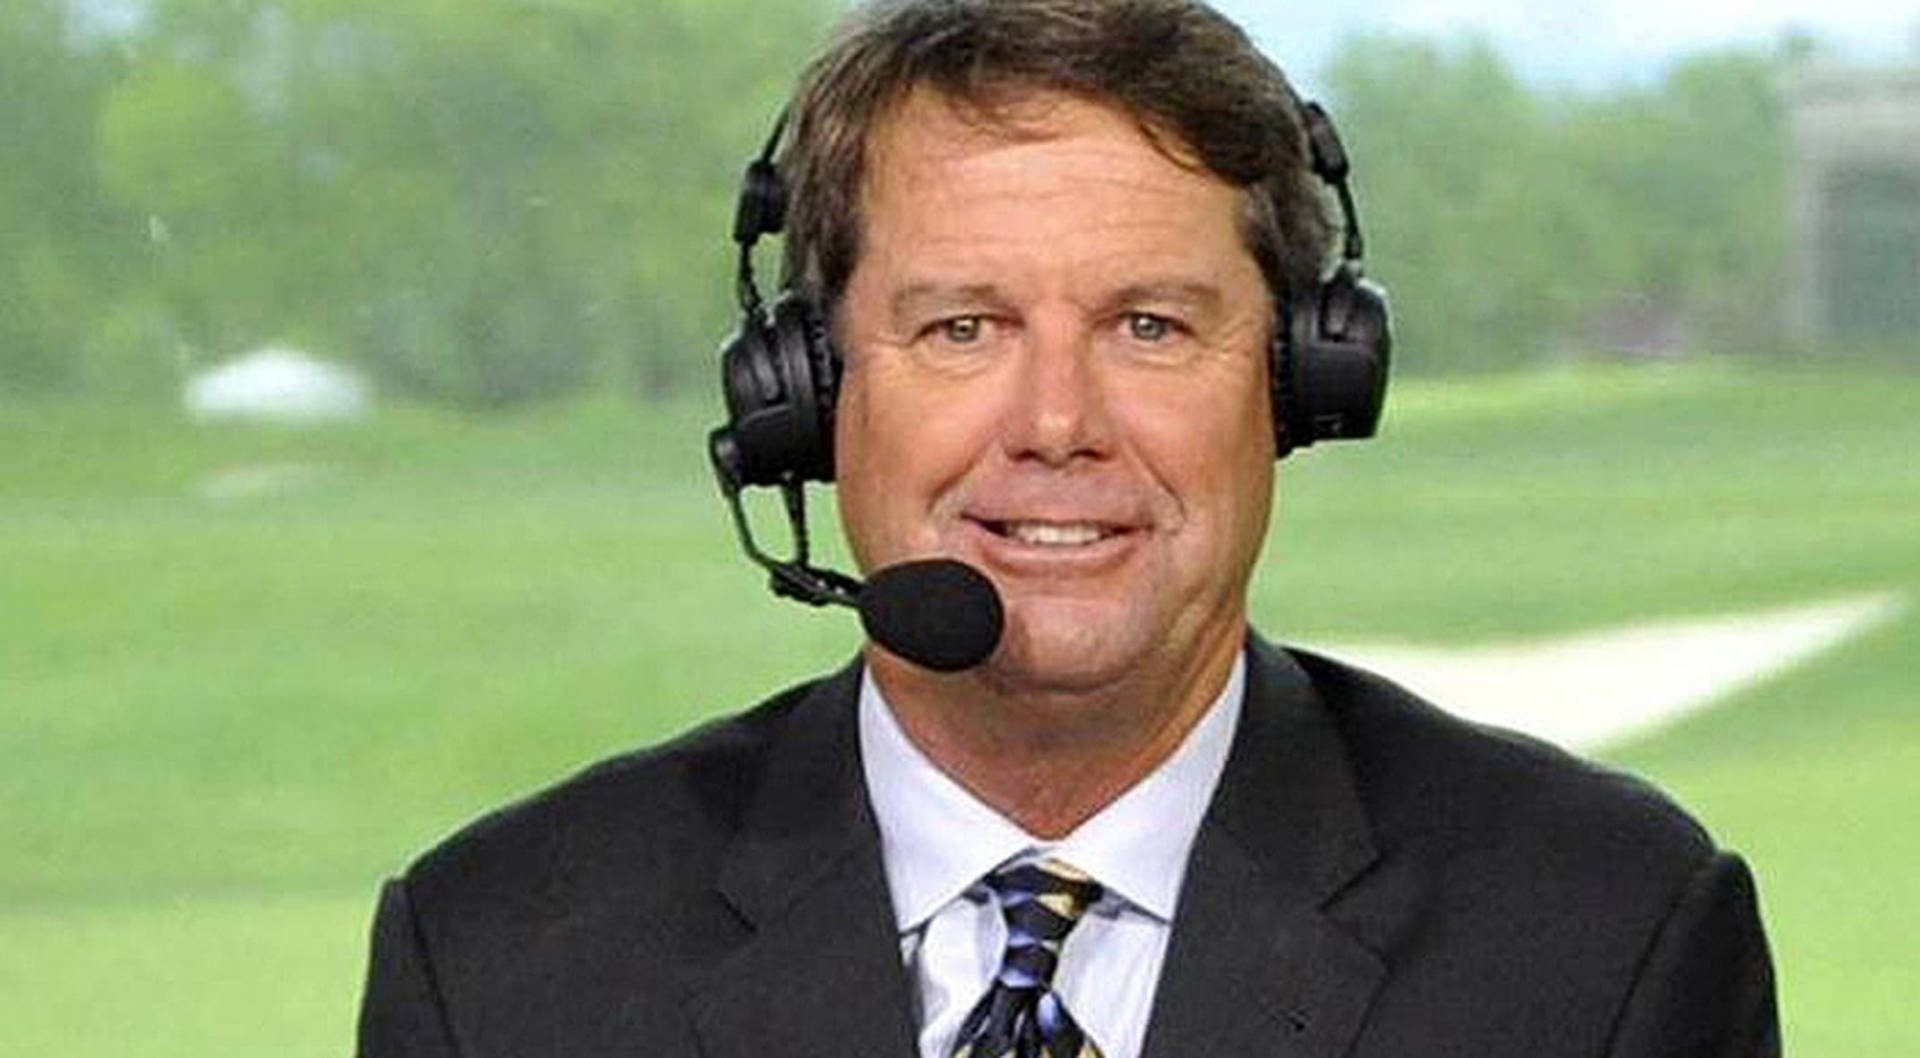 Caption: Renowned Golfer, Paul Azinger in Broadcasting Headset during a Golf Tournament Wallpaper